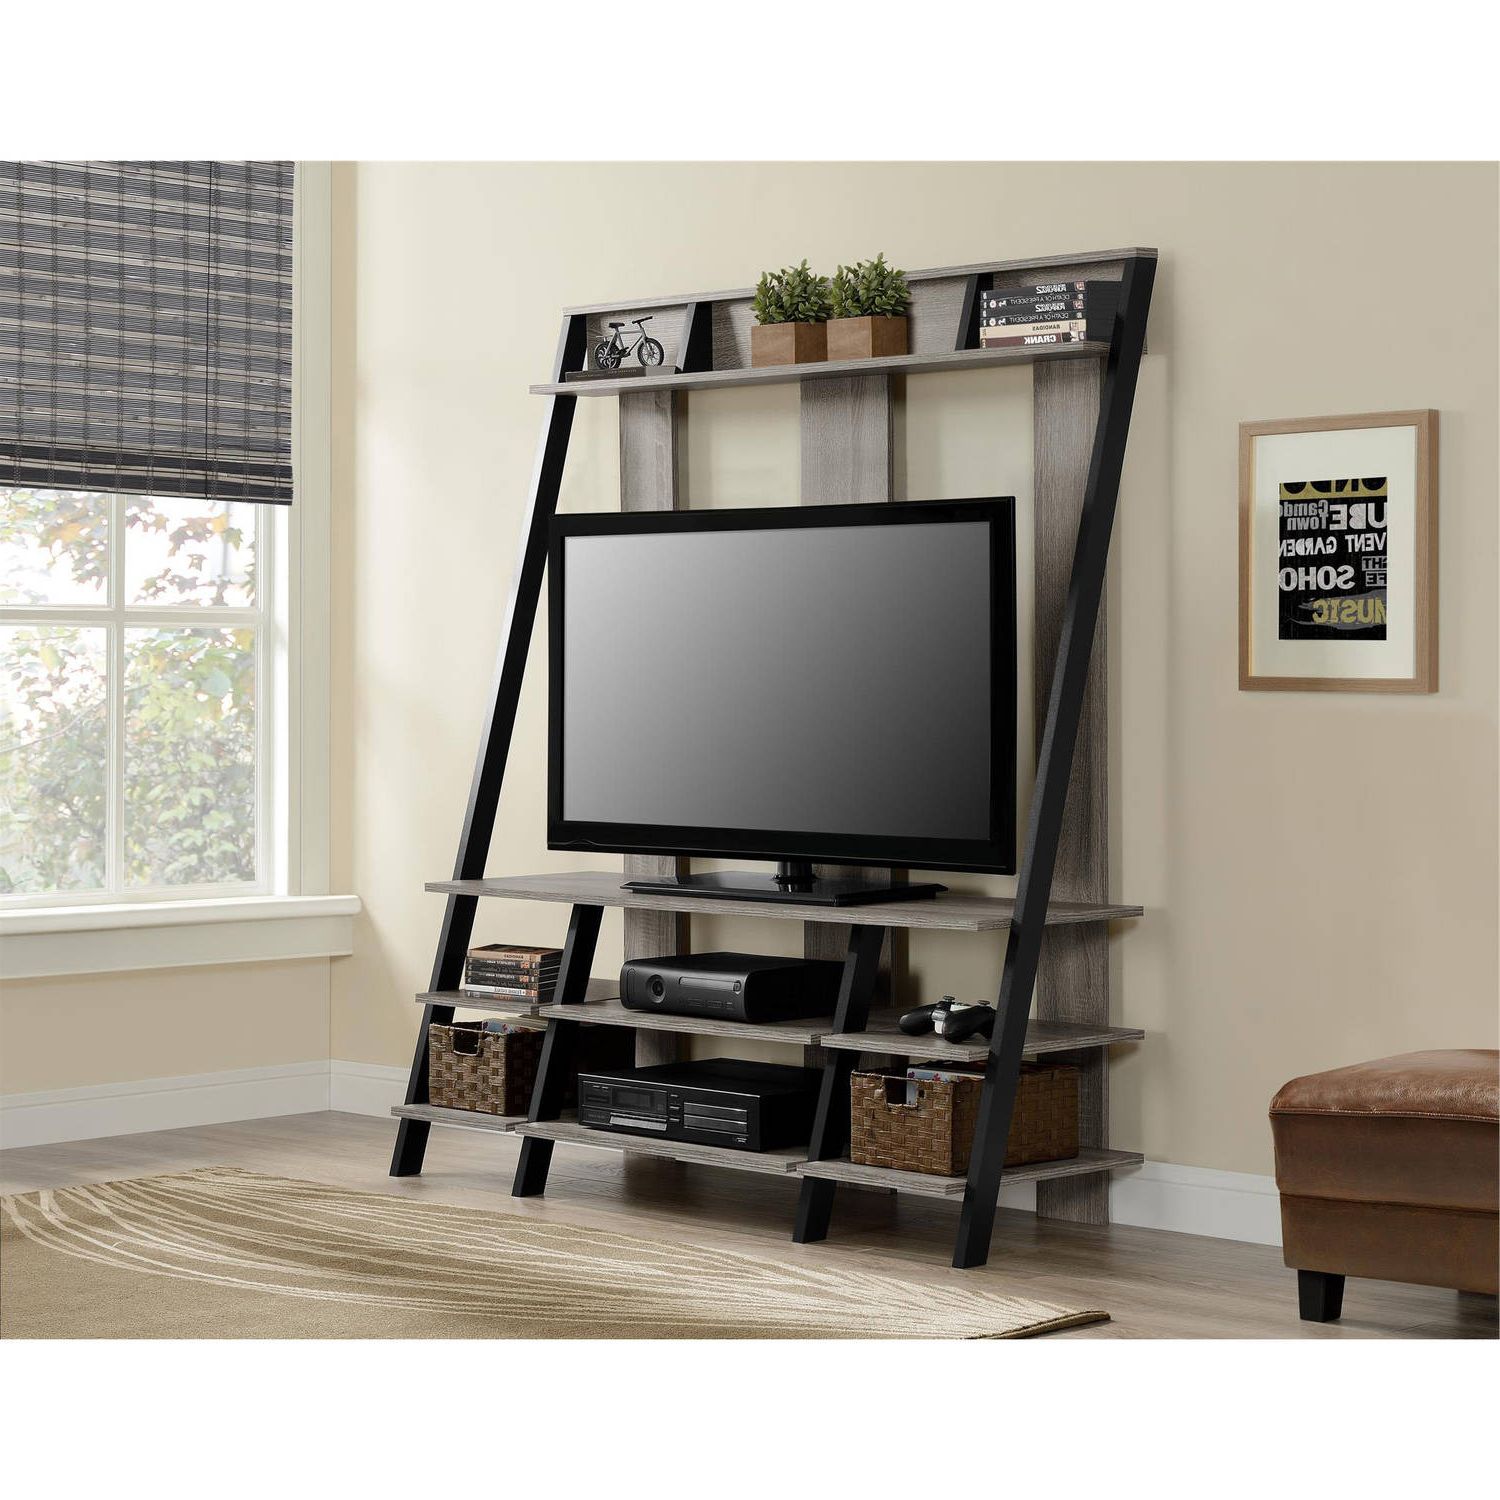 Mainstays No Tools 3 Cube Storage Entertainment Center For Within Mainstays 3 Door Tv Stands Console In Multiple Colors (View 7 of 20)